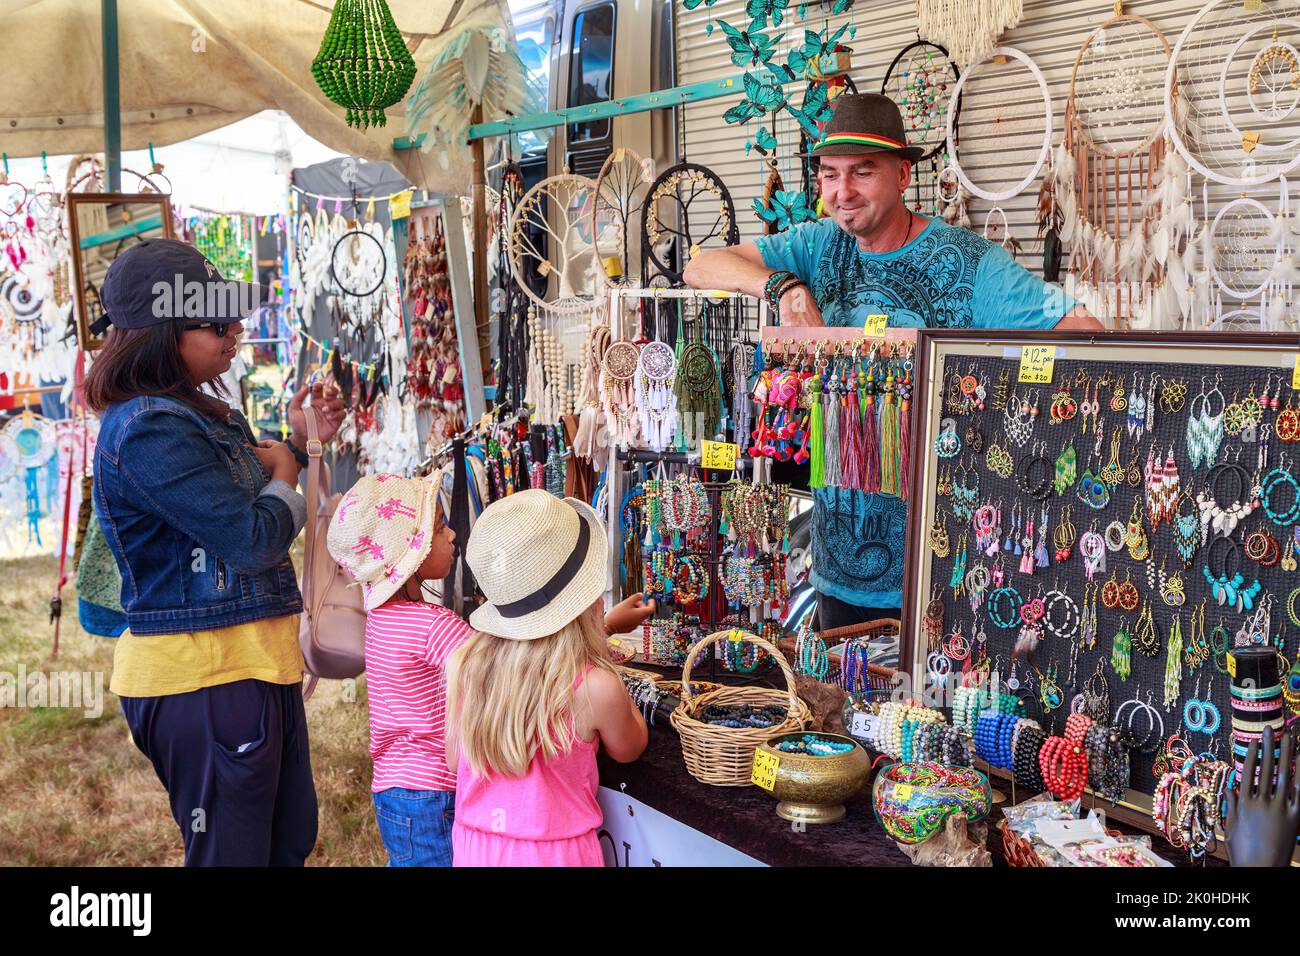 A stall selling jewelry, dreamcatchers and other colorful trinkets at a traveling fair Stock Photo